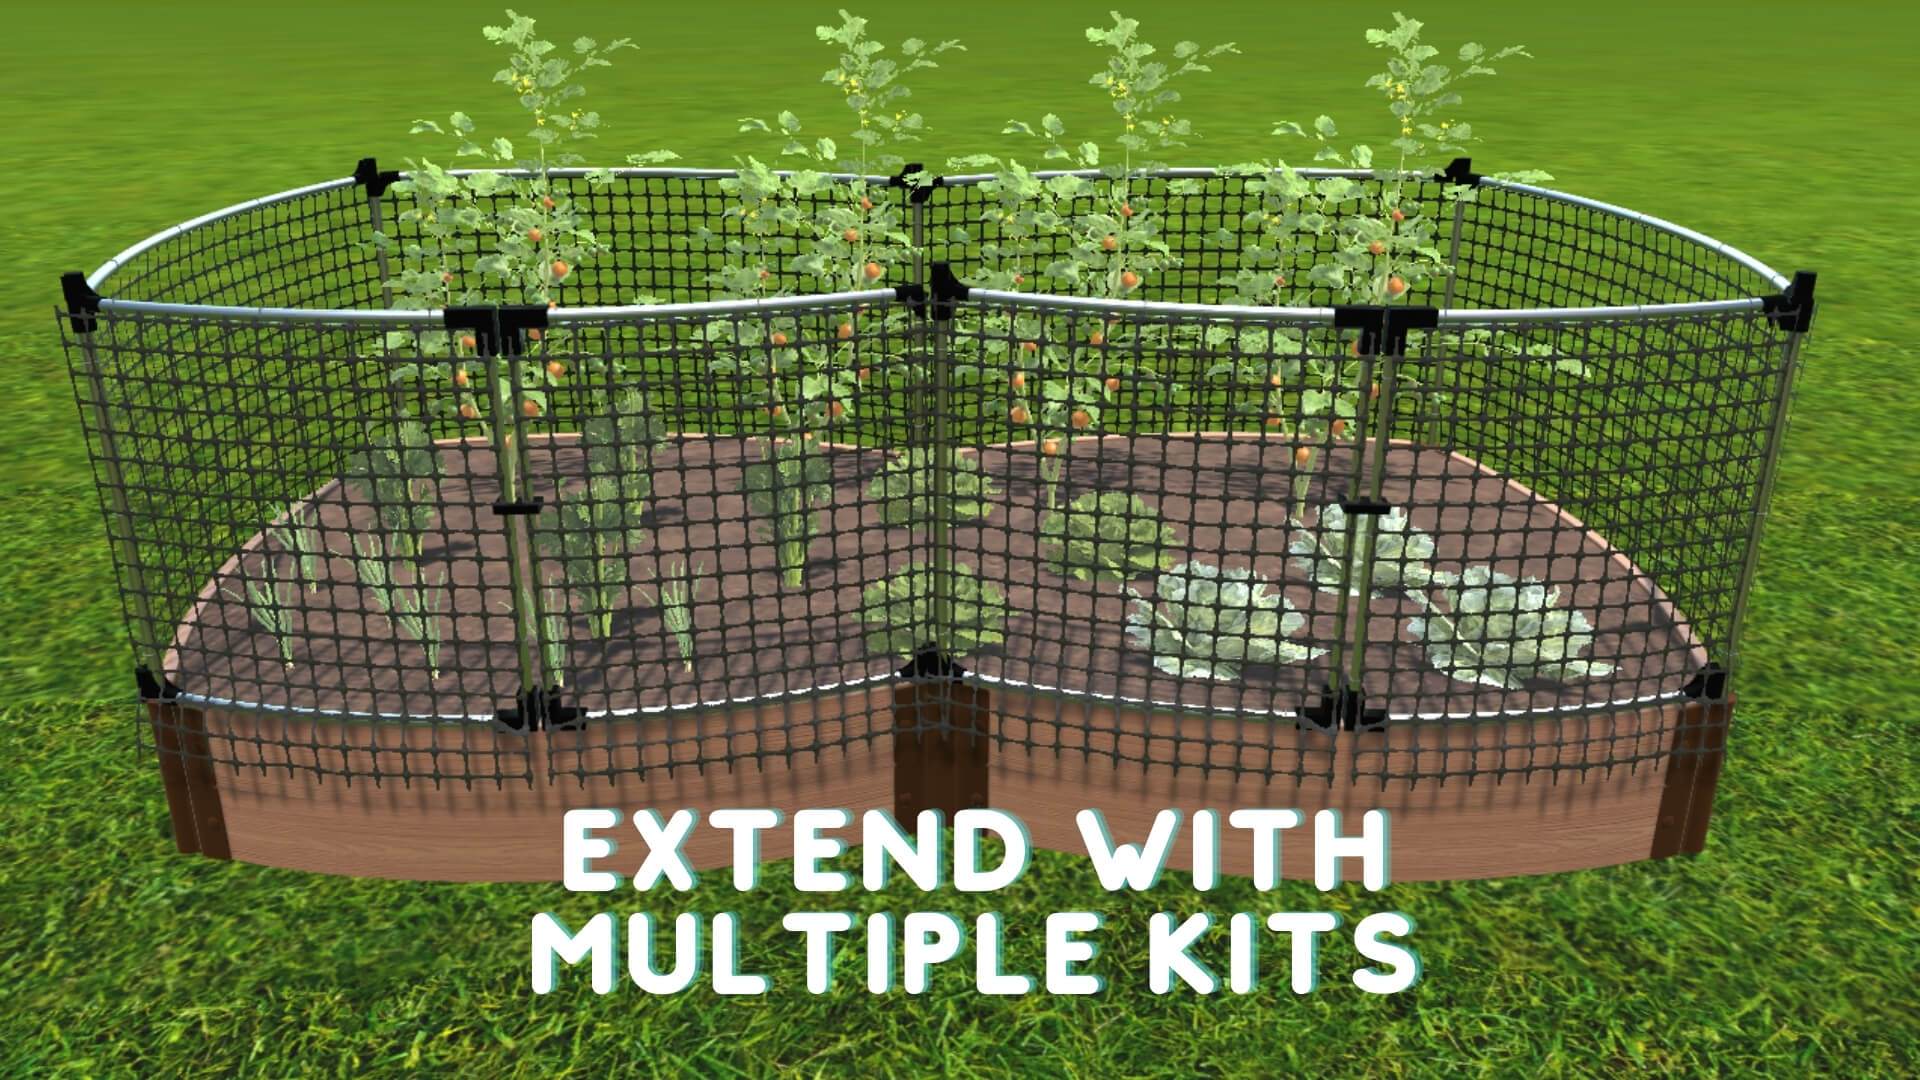 Stack & Extend 'Animal Barrier' with Gate - 4 Foot Wide Curved Panels